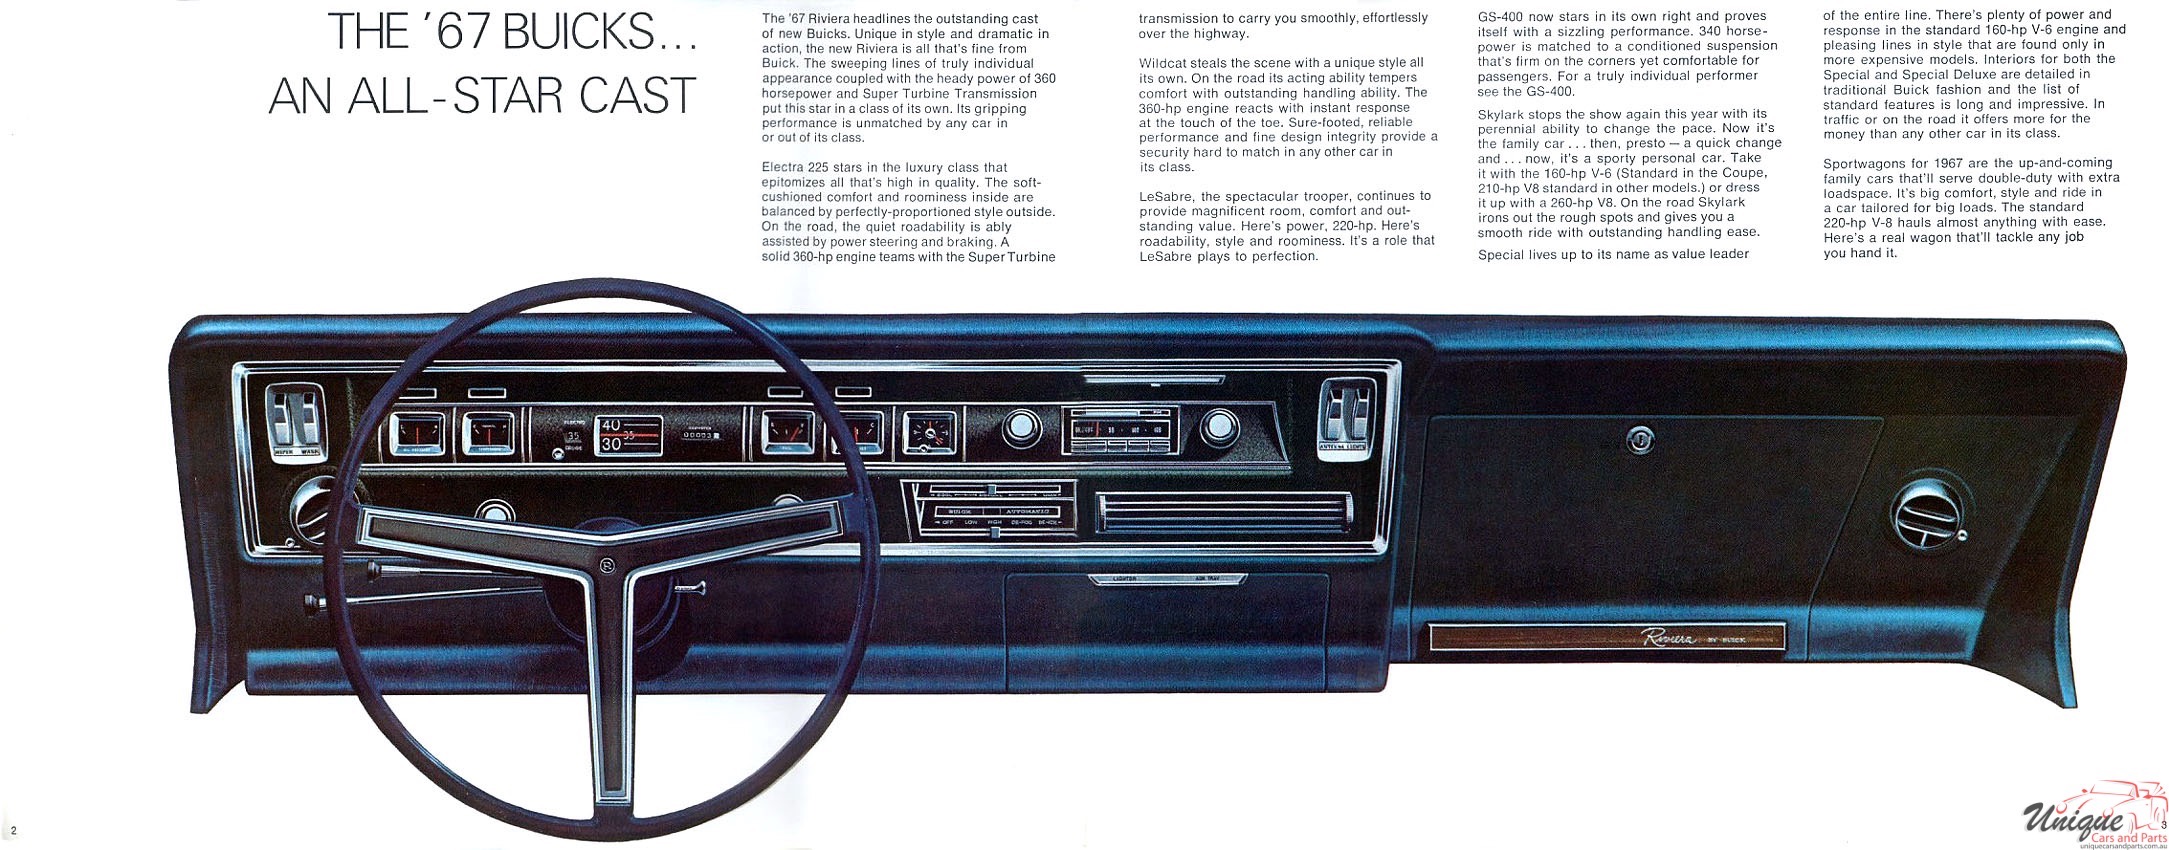 1967 Buick Brochure Page 6